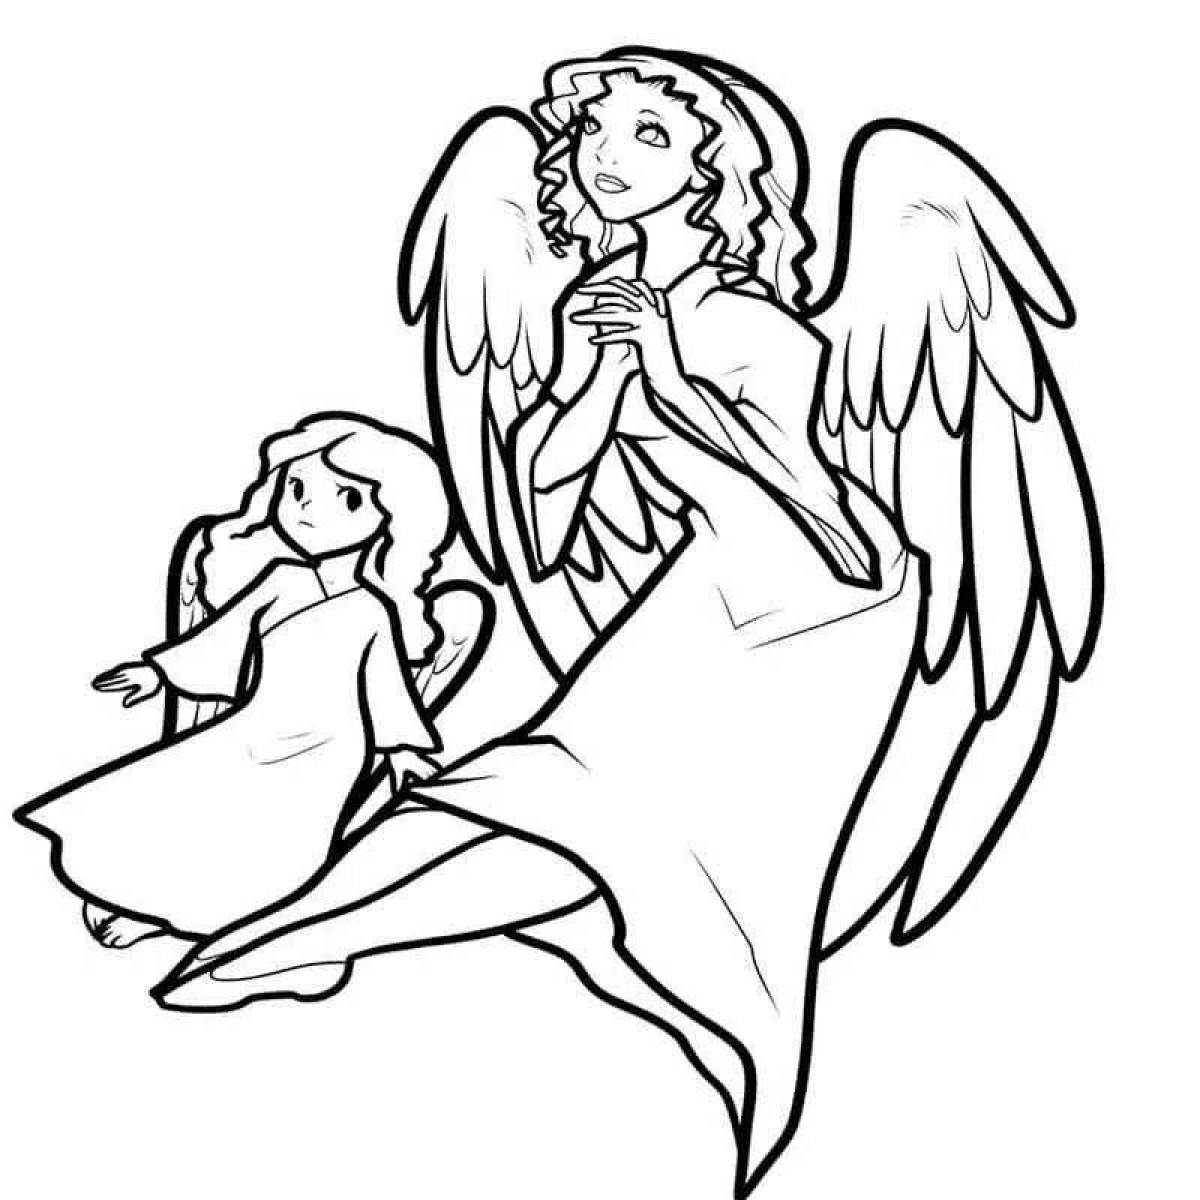 Glowing guardian angel coloring page